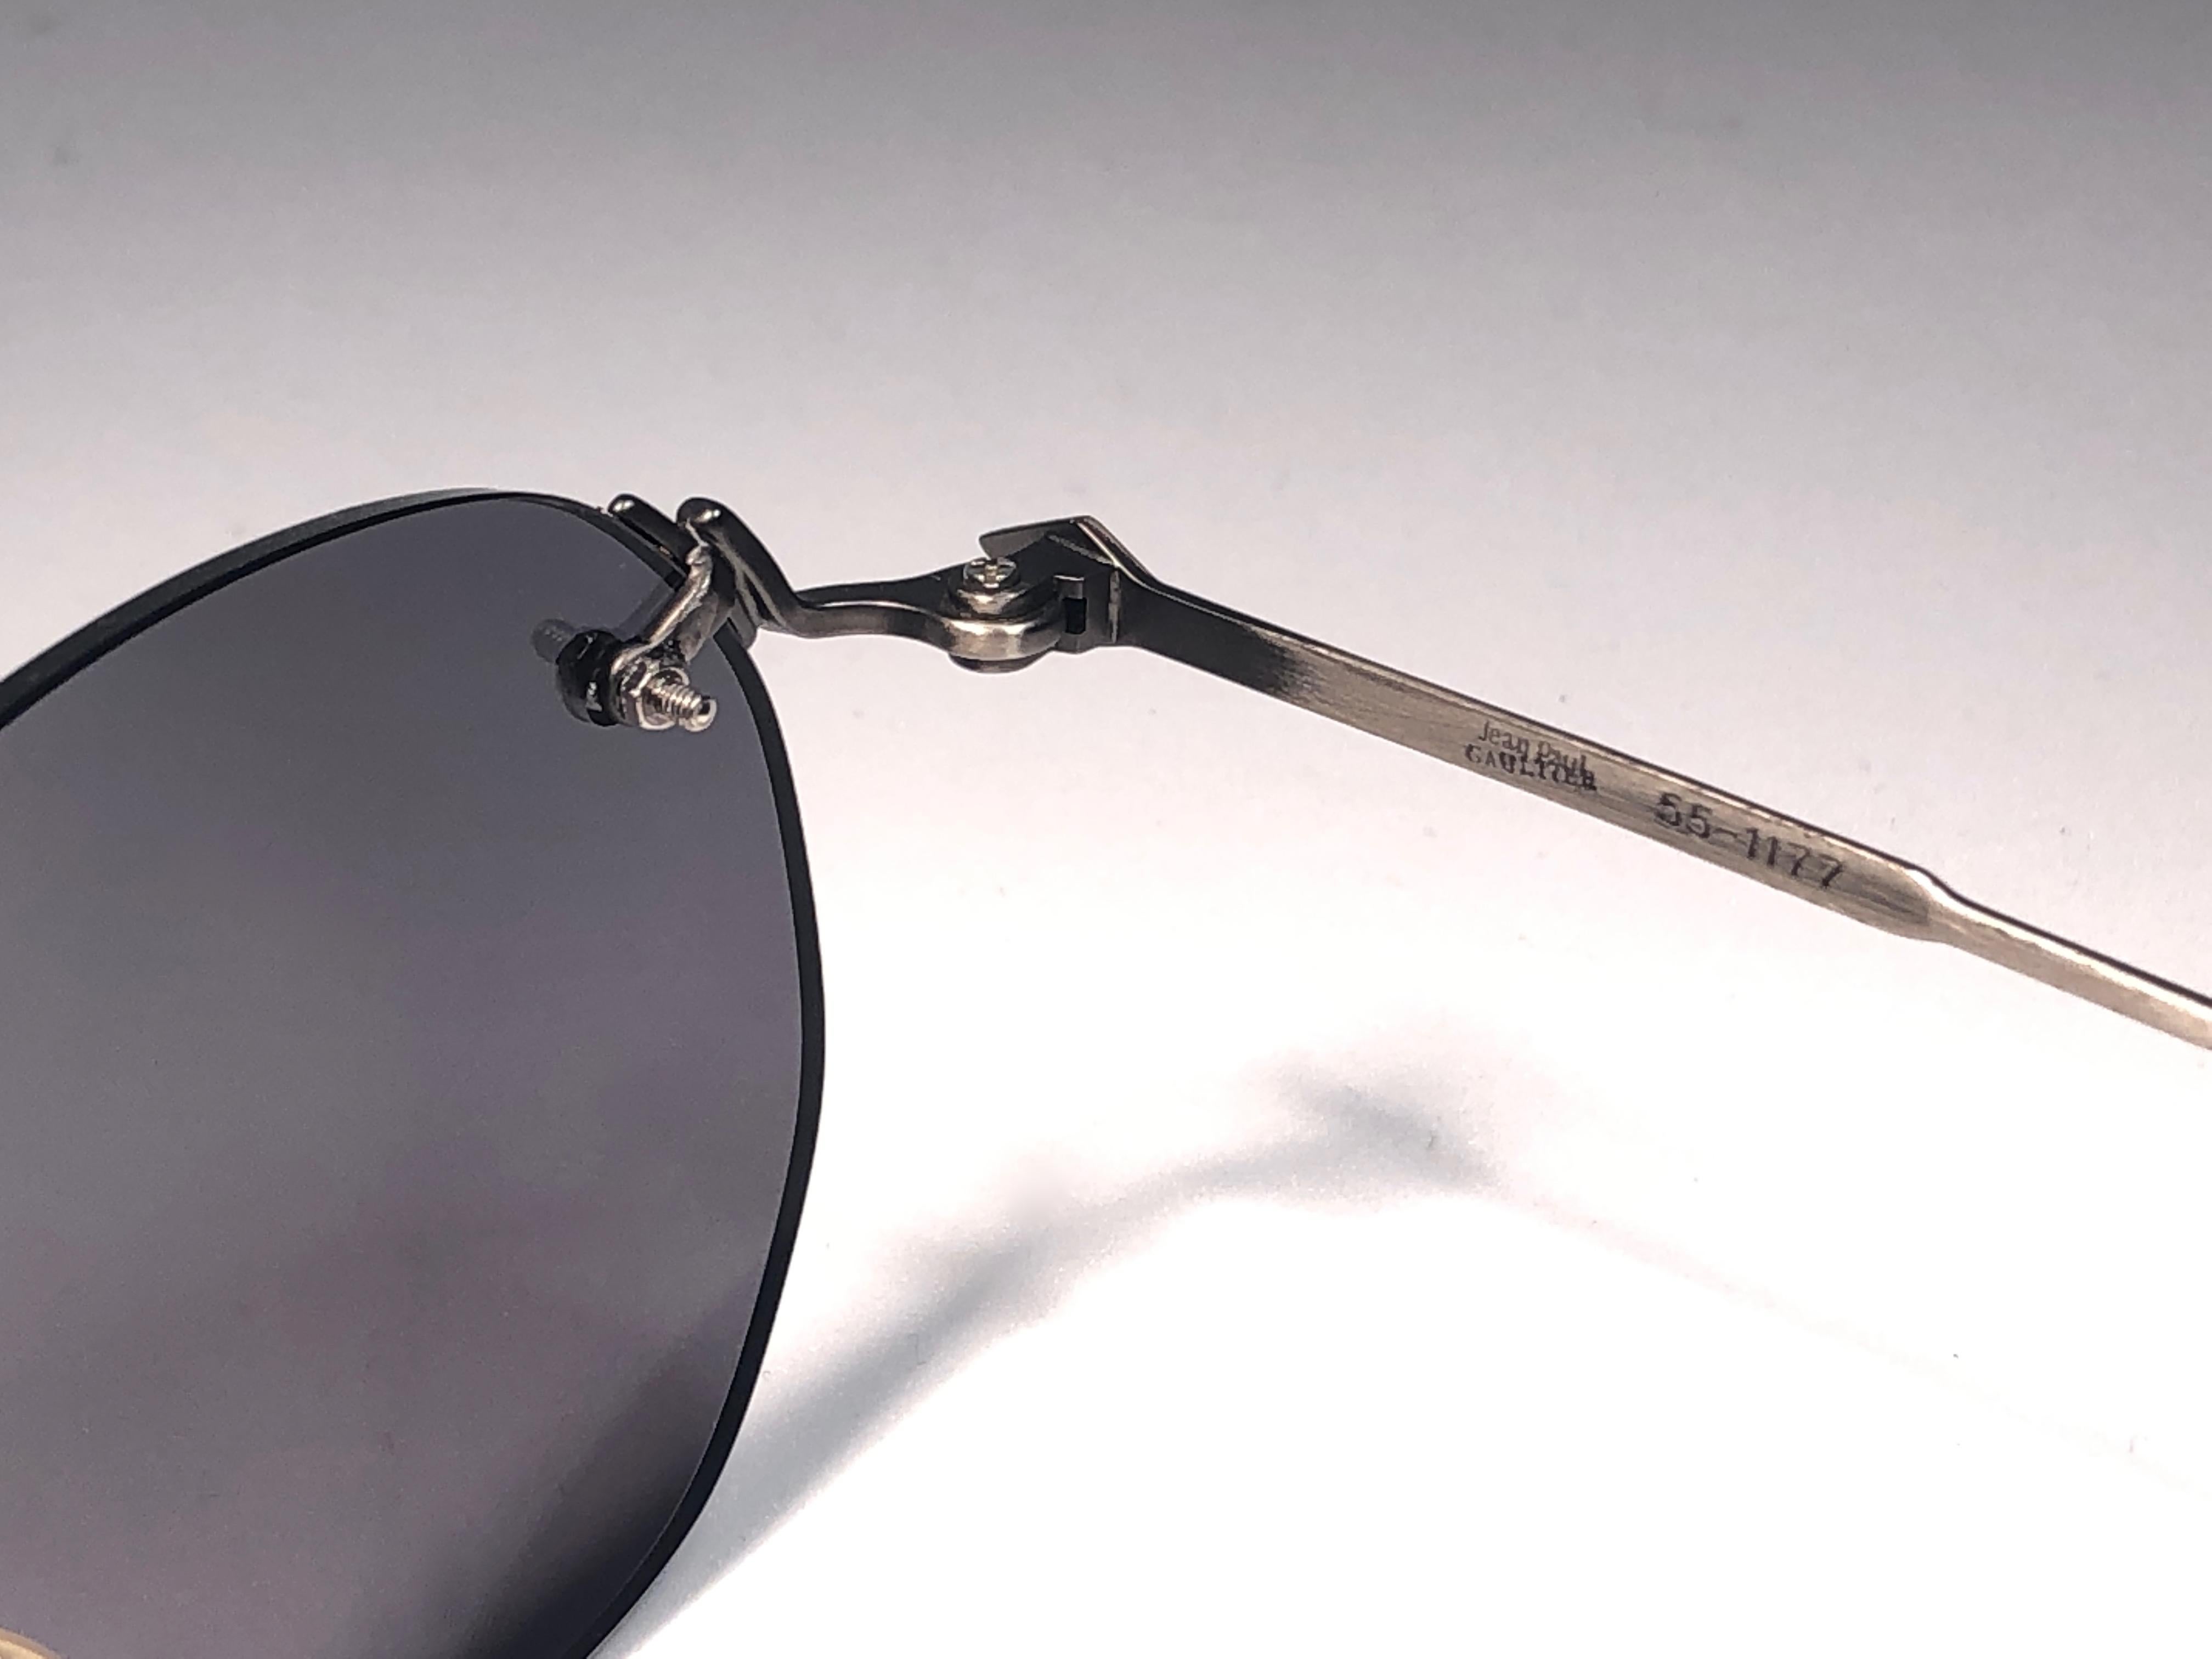 New Jean Paul Gaultier medium gunmetal rimless frame. 
Spotless smoke grey lenses that complete a ready to wear JPG look.

Amazing design with strong yet intricate details.
Design and produced in the 1990's.
New, never worn or displayed.
This item